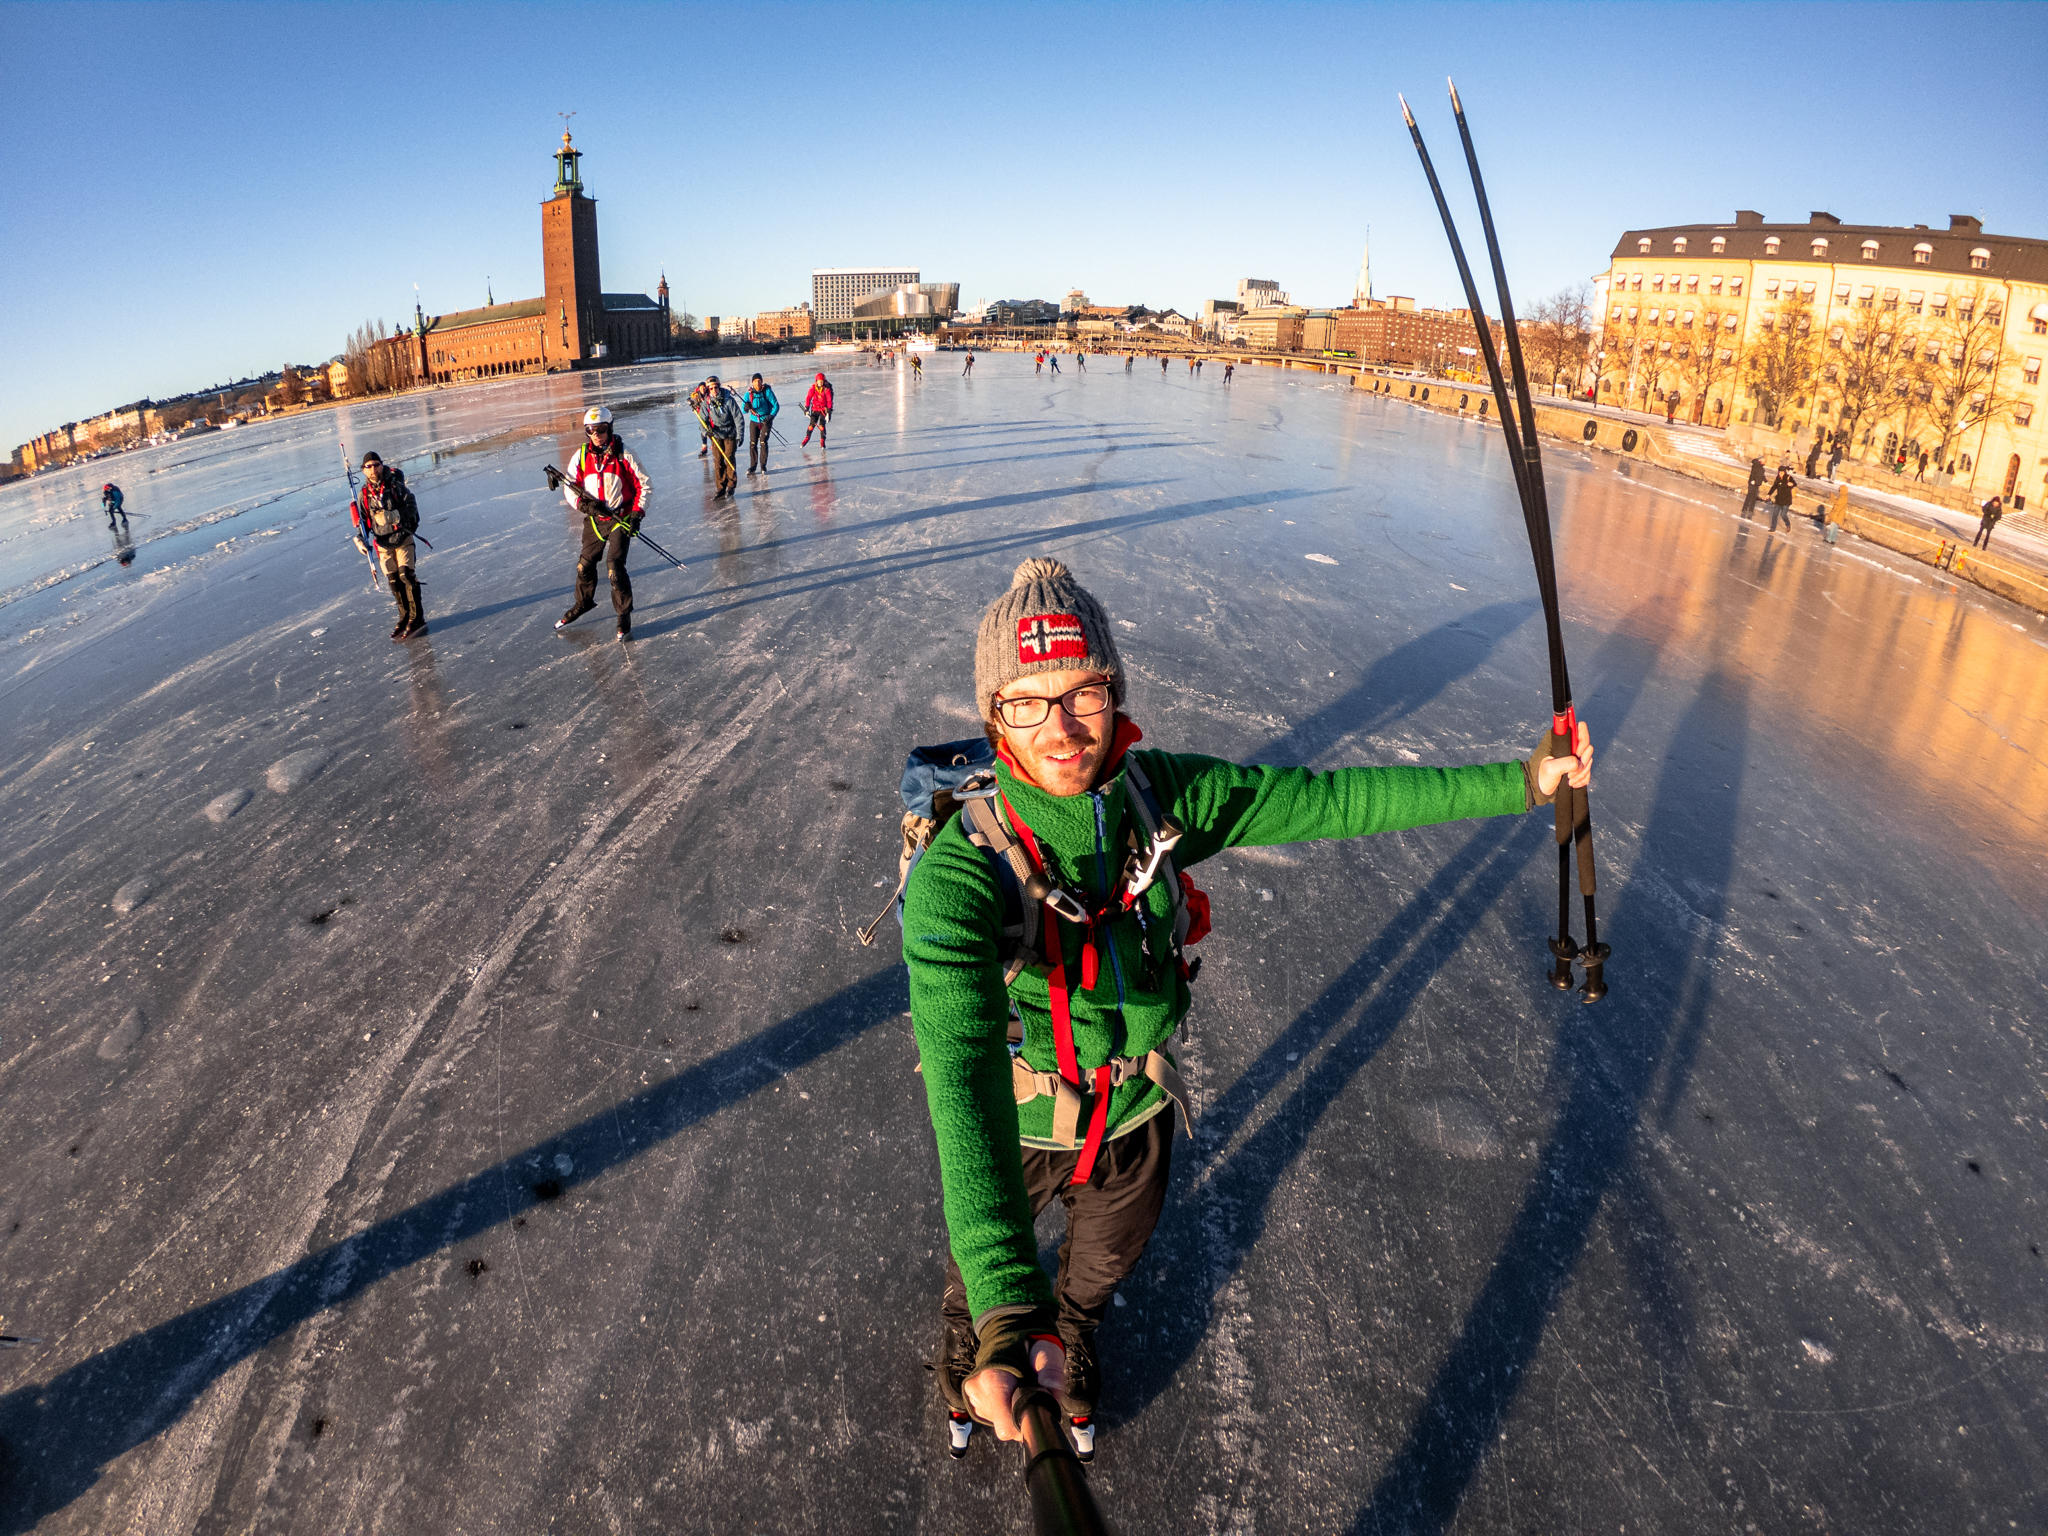 Ice skating in front of Stockholm City Hall